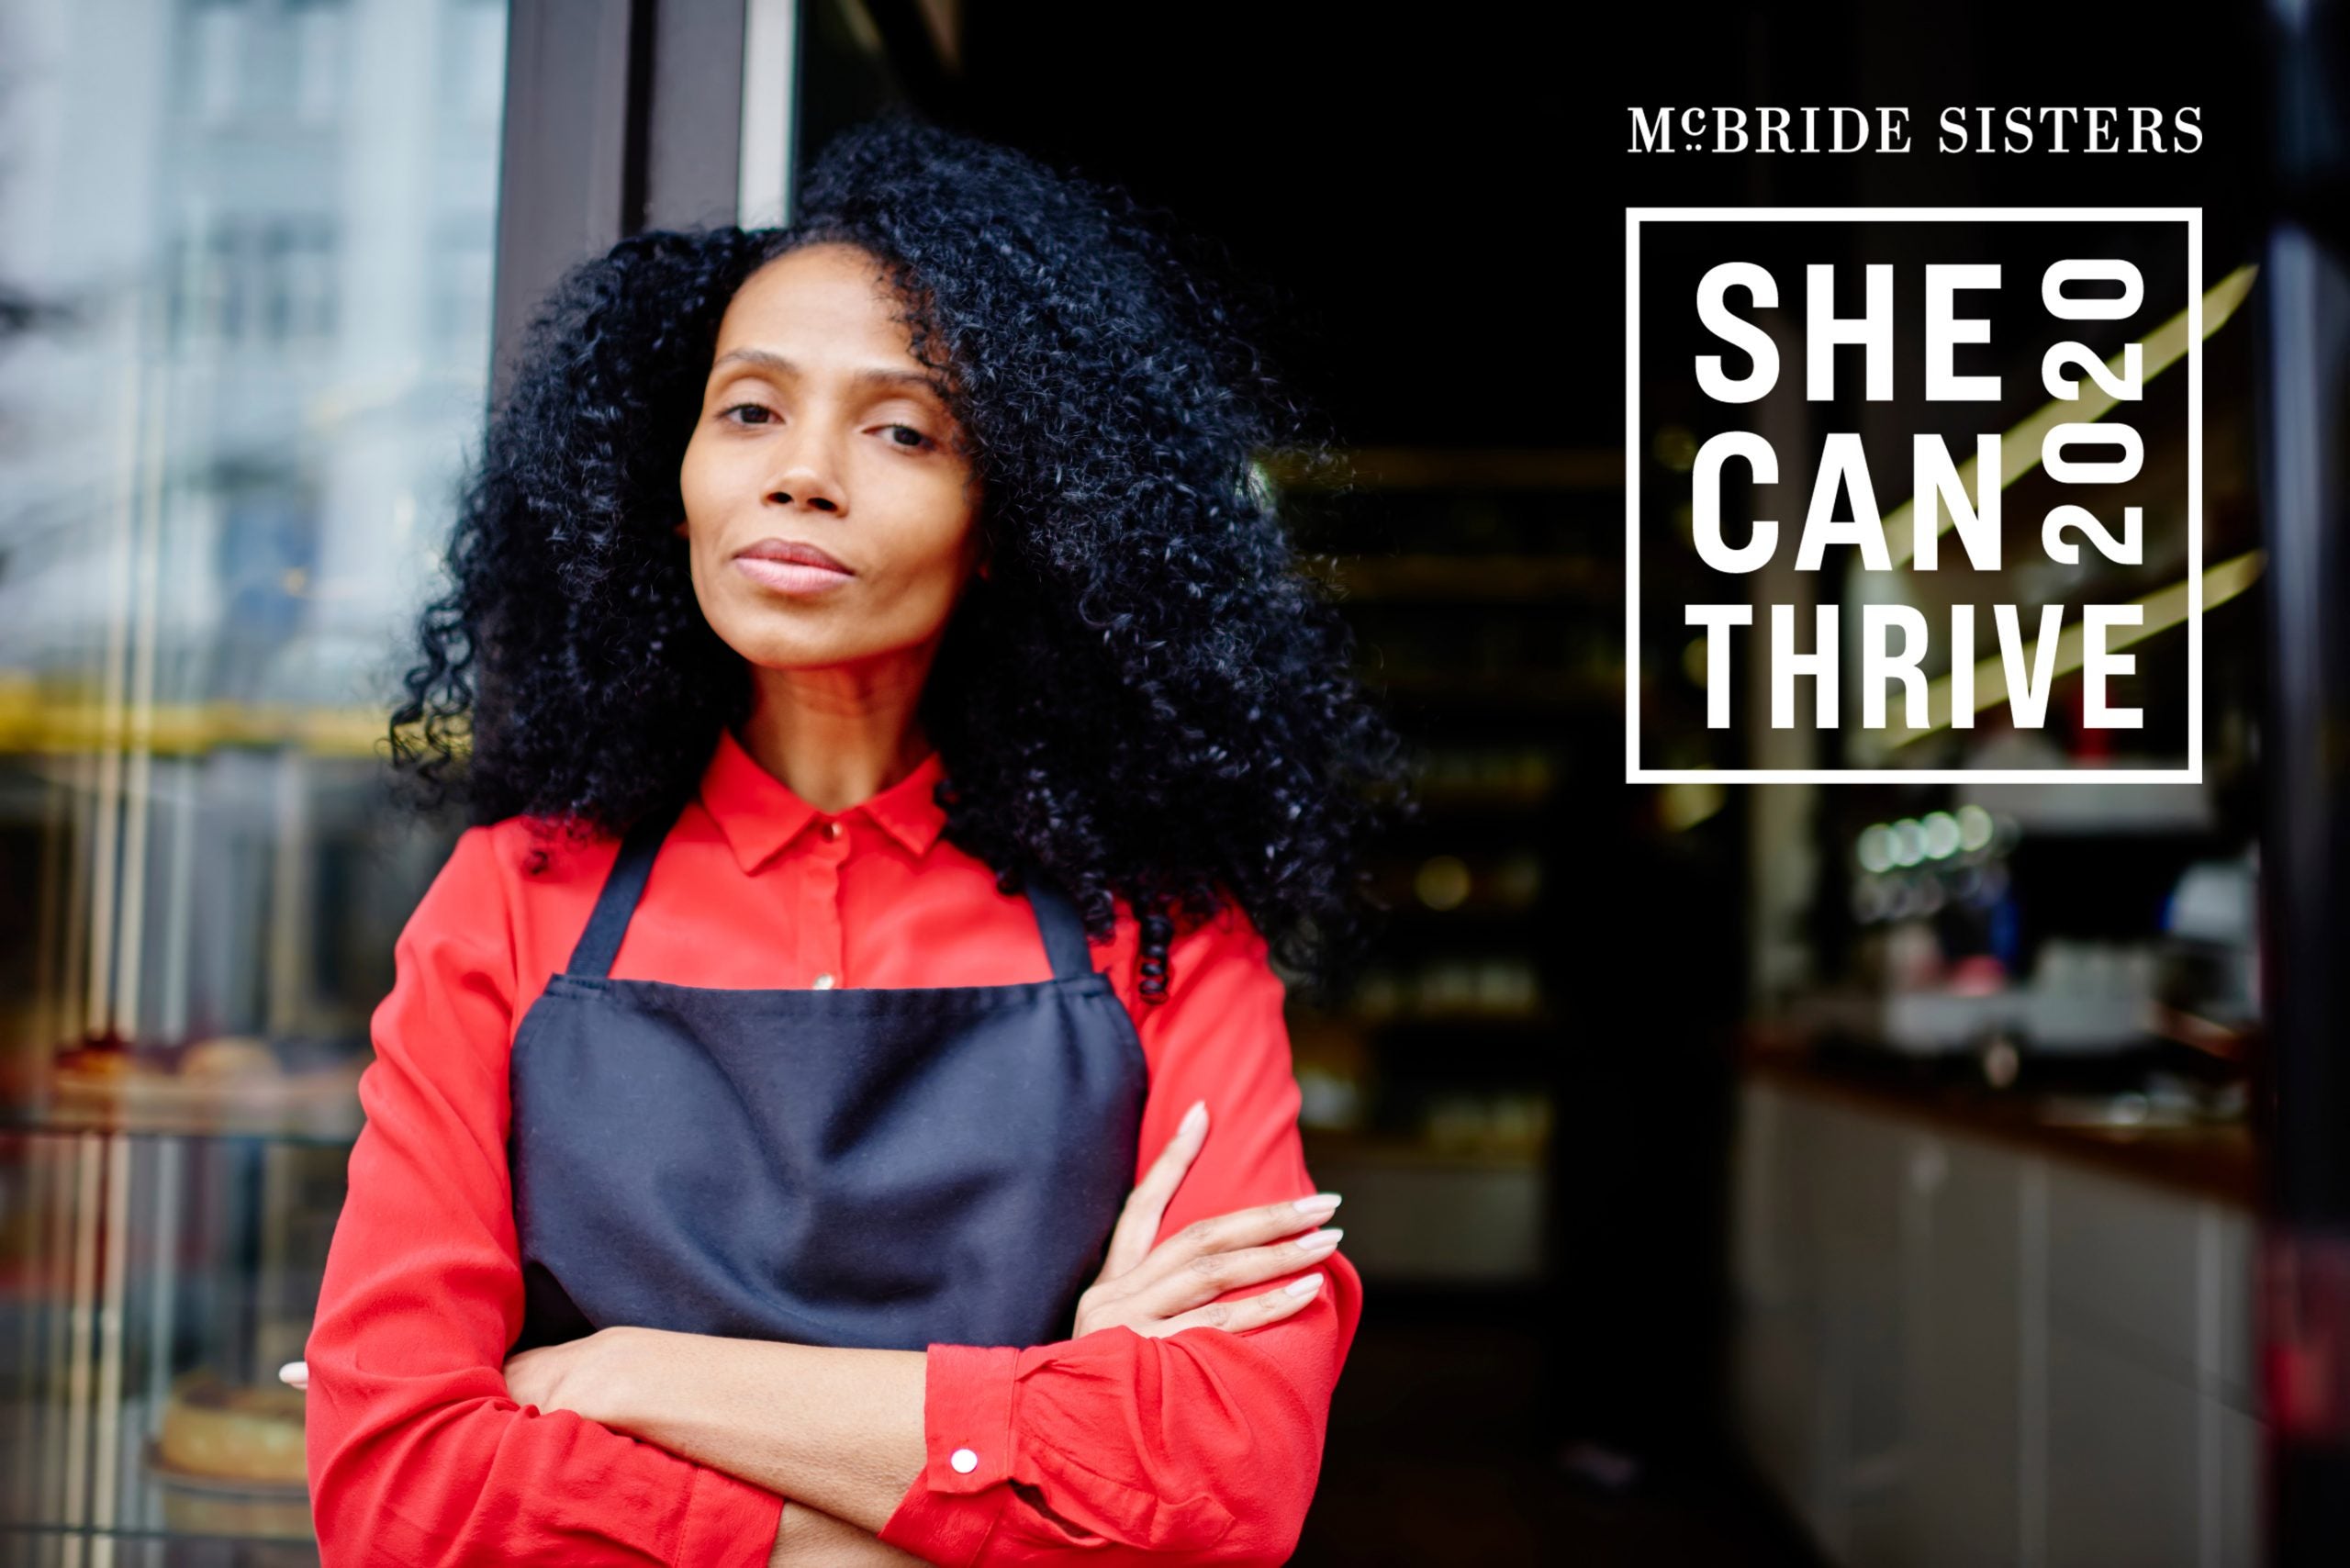 McBride Sisters Launch #SheCanThrive2020 Grant To Help Black Women Business Owners